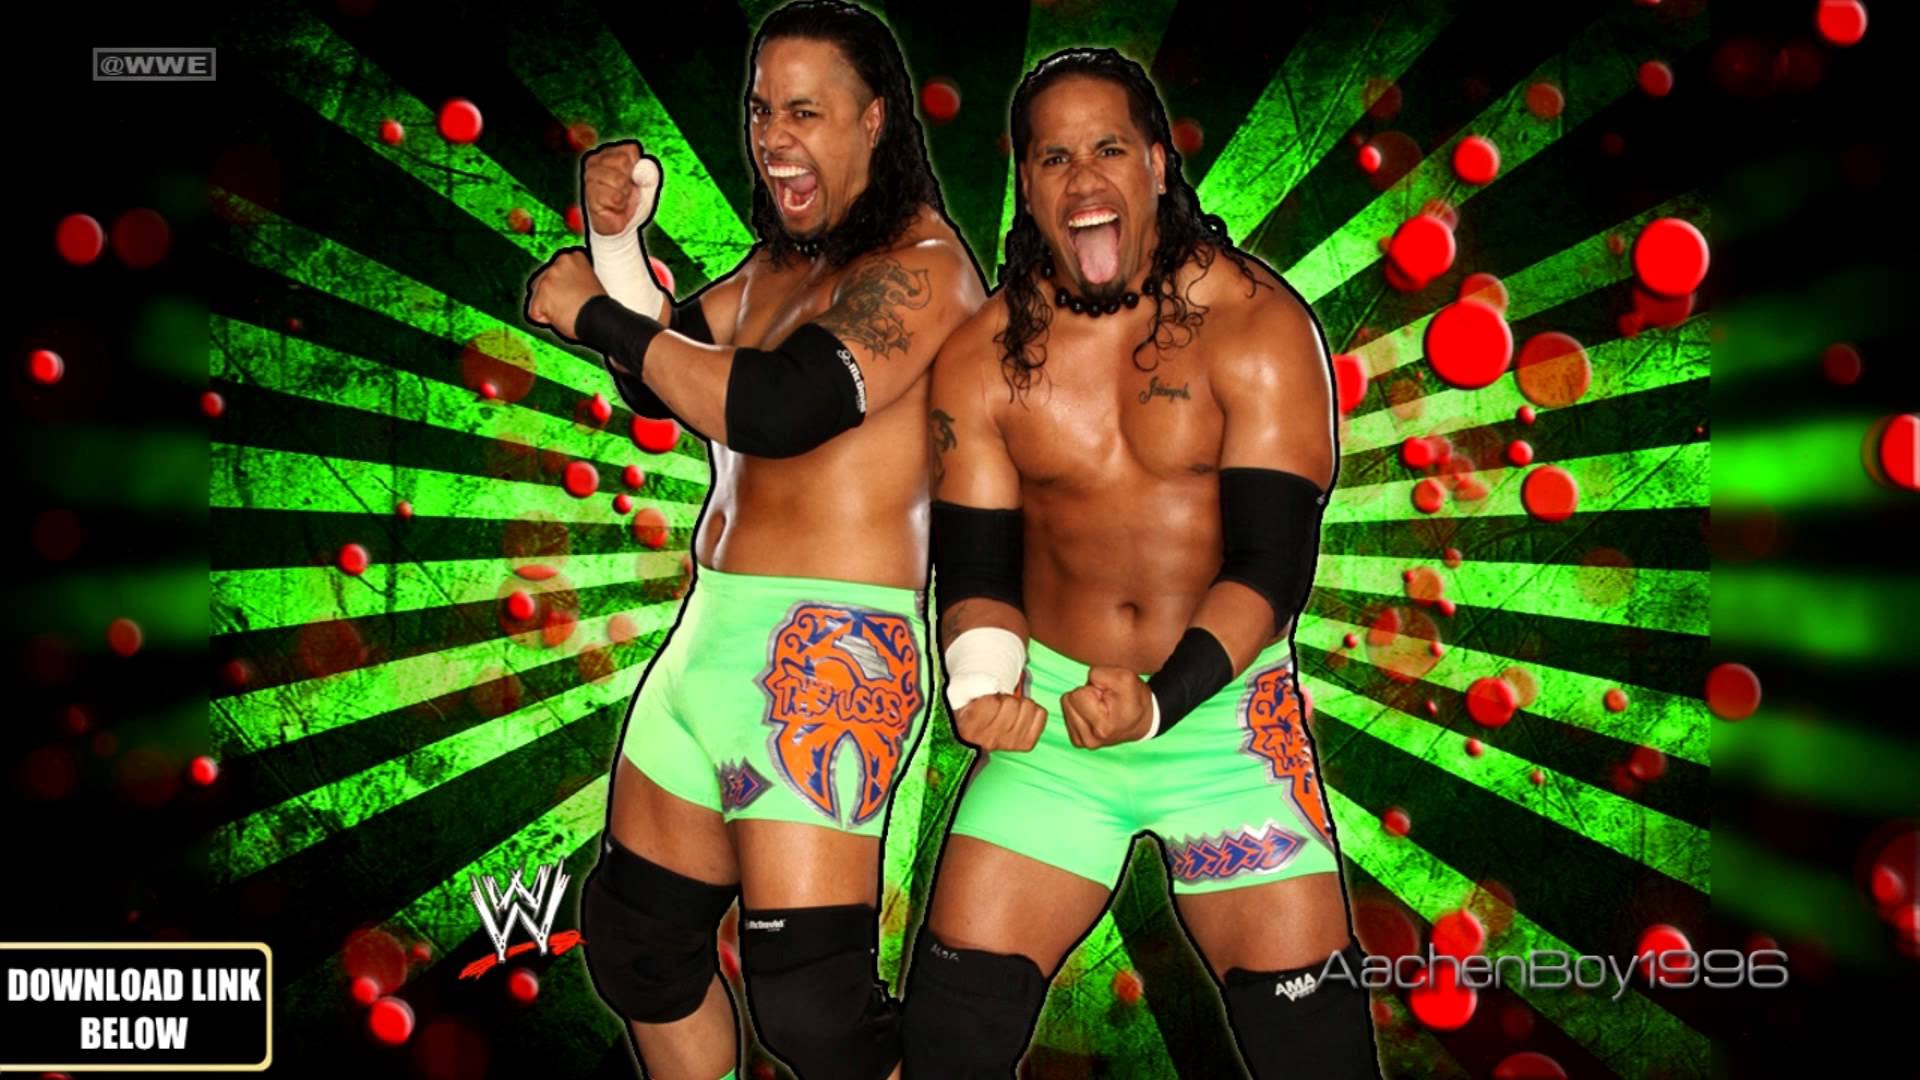 WWE The Usos 4th Theme Song So Close Now Arena Edit + Download